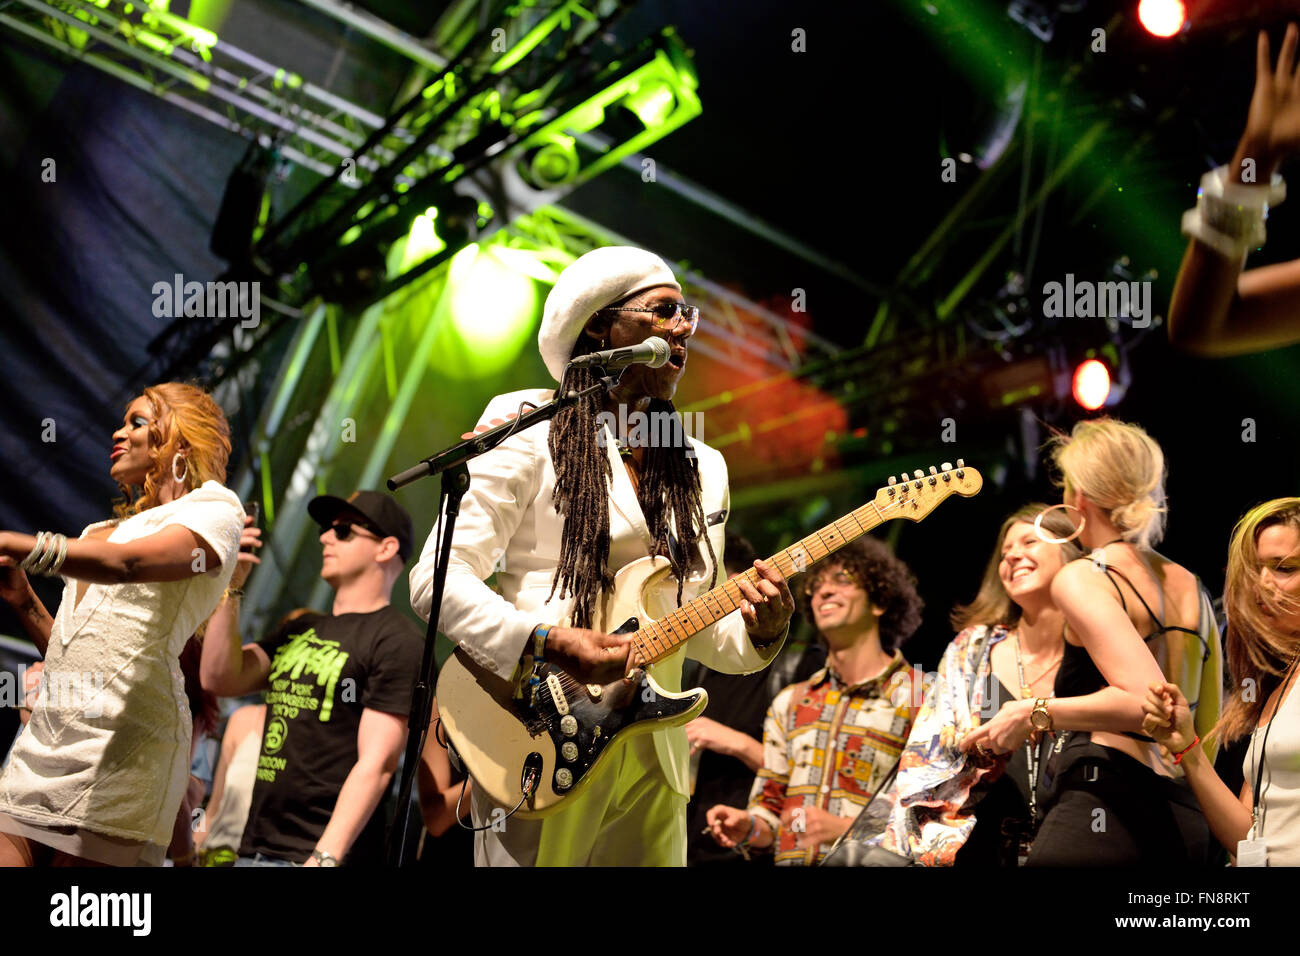 BARCELONA - JUN 14: Chic featuring Nile Rodgers (band) performs at Sonar Festival on June 14, 2014 in Barcelona, Spain. Stock Photo